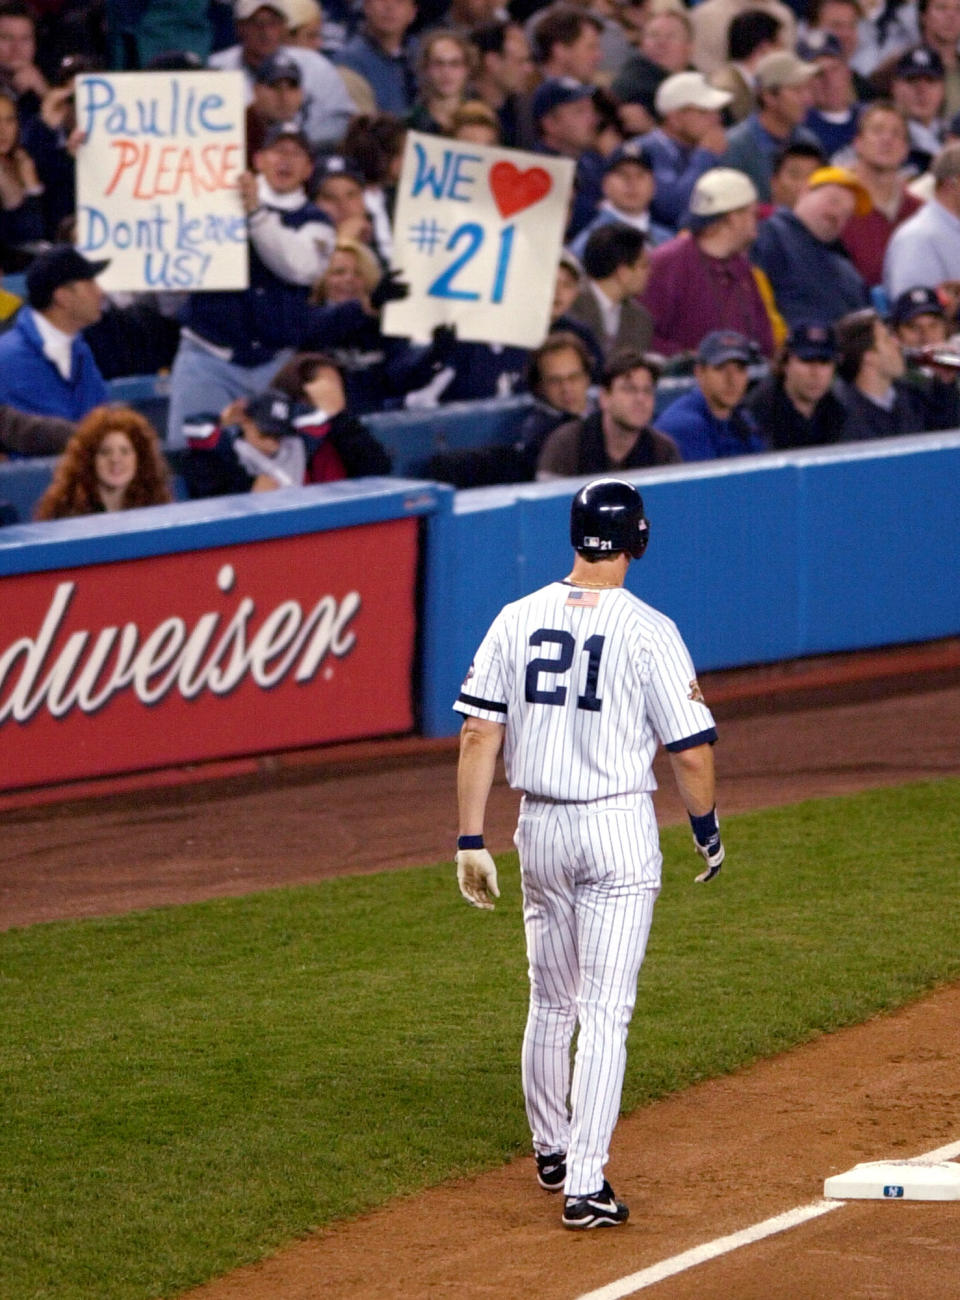 FILE - With fans showing their appreciation, New York Yankees baserunner Paul O'Neill stays close to third base after advancing on a Tino Martinez single in the first inning of World Series Game 5 against the Arizona Diamondbacks at Yankee Stadium Thursday, Nov. 1, 2001. O'Neill's No. 21 will be retired by the New York Yankees — on Aug. 21. The Yankees said Tuesday, Feb. 22, 2022, that they will hold Paul O'Neill Day ceremonies before that day's game against Toronto _ assuming the lockout ends and the 2022 season is played. (AP Photo/Ron Frehm, File)